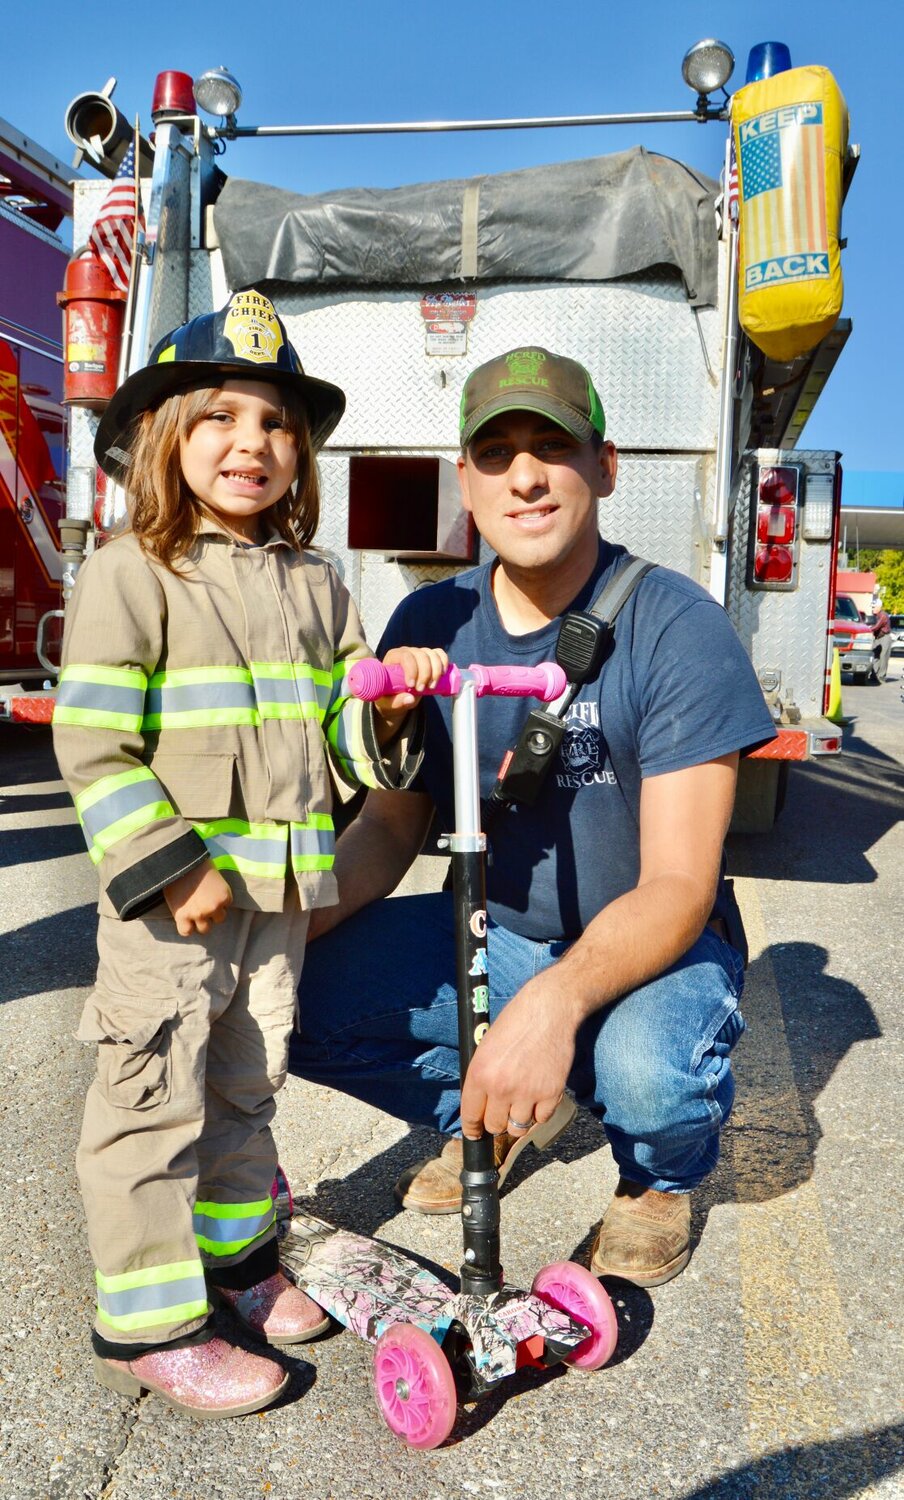 Kaesyn Meltesen, 4 when this photo was taken, took part in the 2022 Howell County Fire Engine Rally dressed out in her own personalized gear and sparkly pink boots. She is the daughter of Howell Rural Fire District No. 1 firefighter Kevin Meltesen, shown with her, and Howell County 911 employee Kalli Meltesen. This year’s festivities will take place Oct. 7 in the parking lot of the Greater Ozarks Center for Advanced Technology, 395 E. Broadway in West Plains. All in the community are invited.